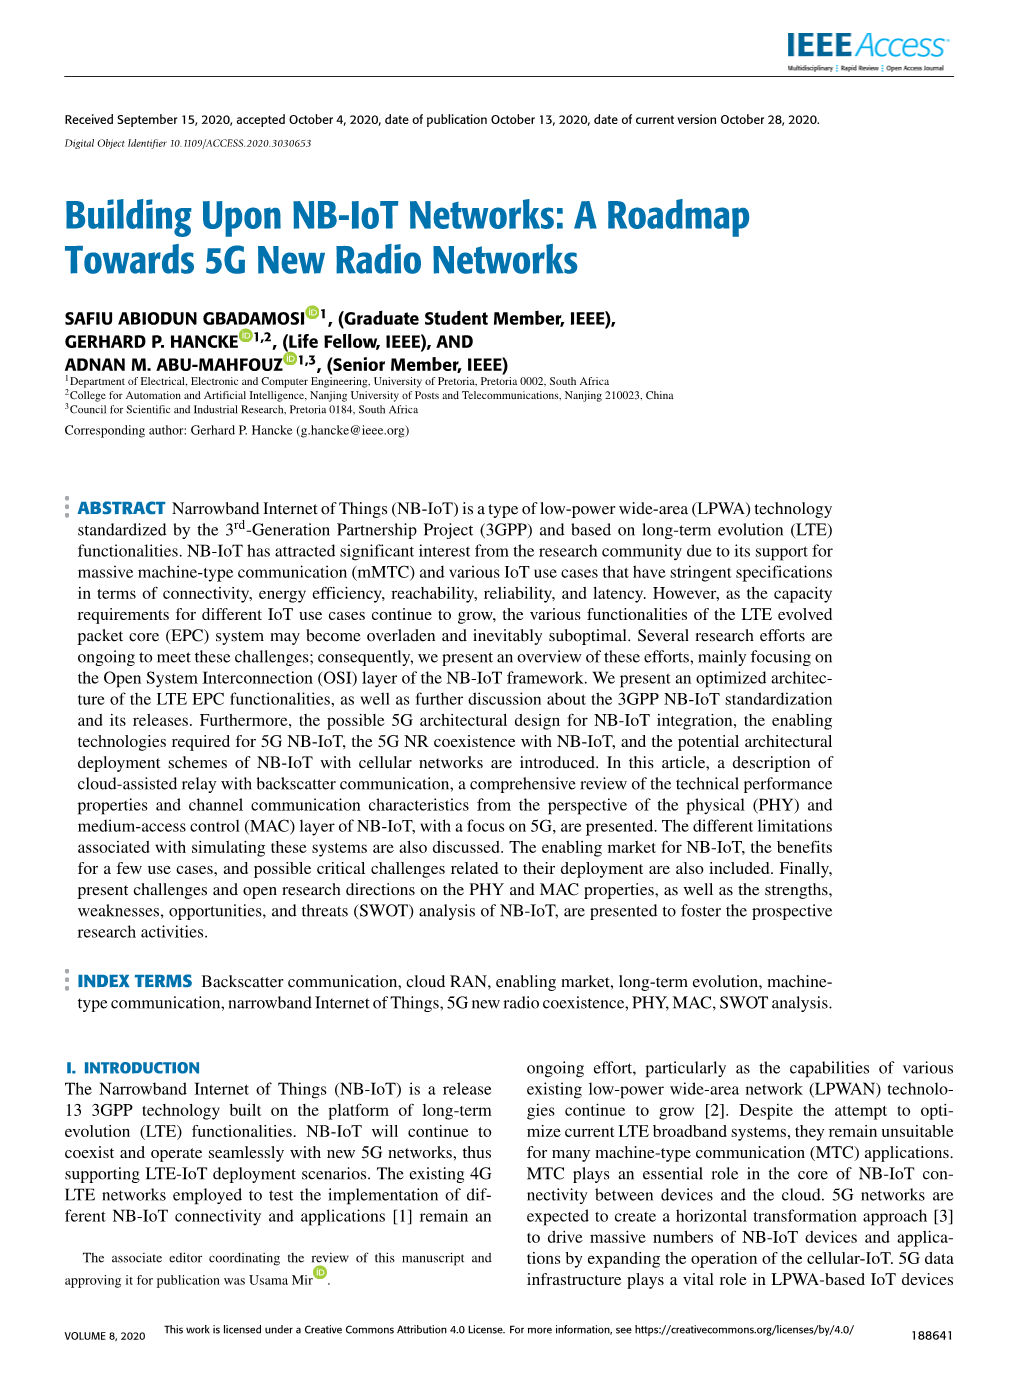 Building Upon NB-Iot Networks: a Roadmap Towards 5G New Radio Networks